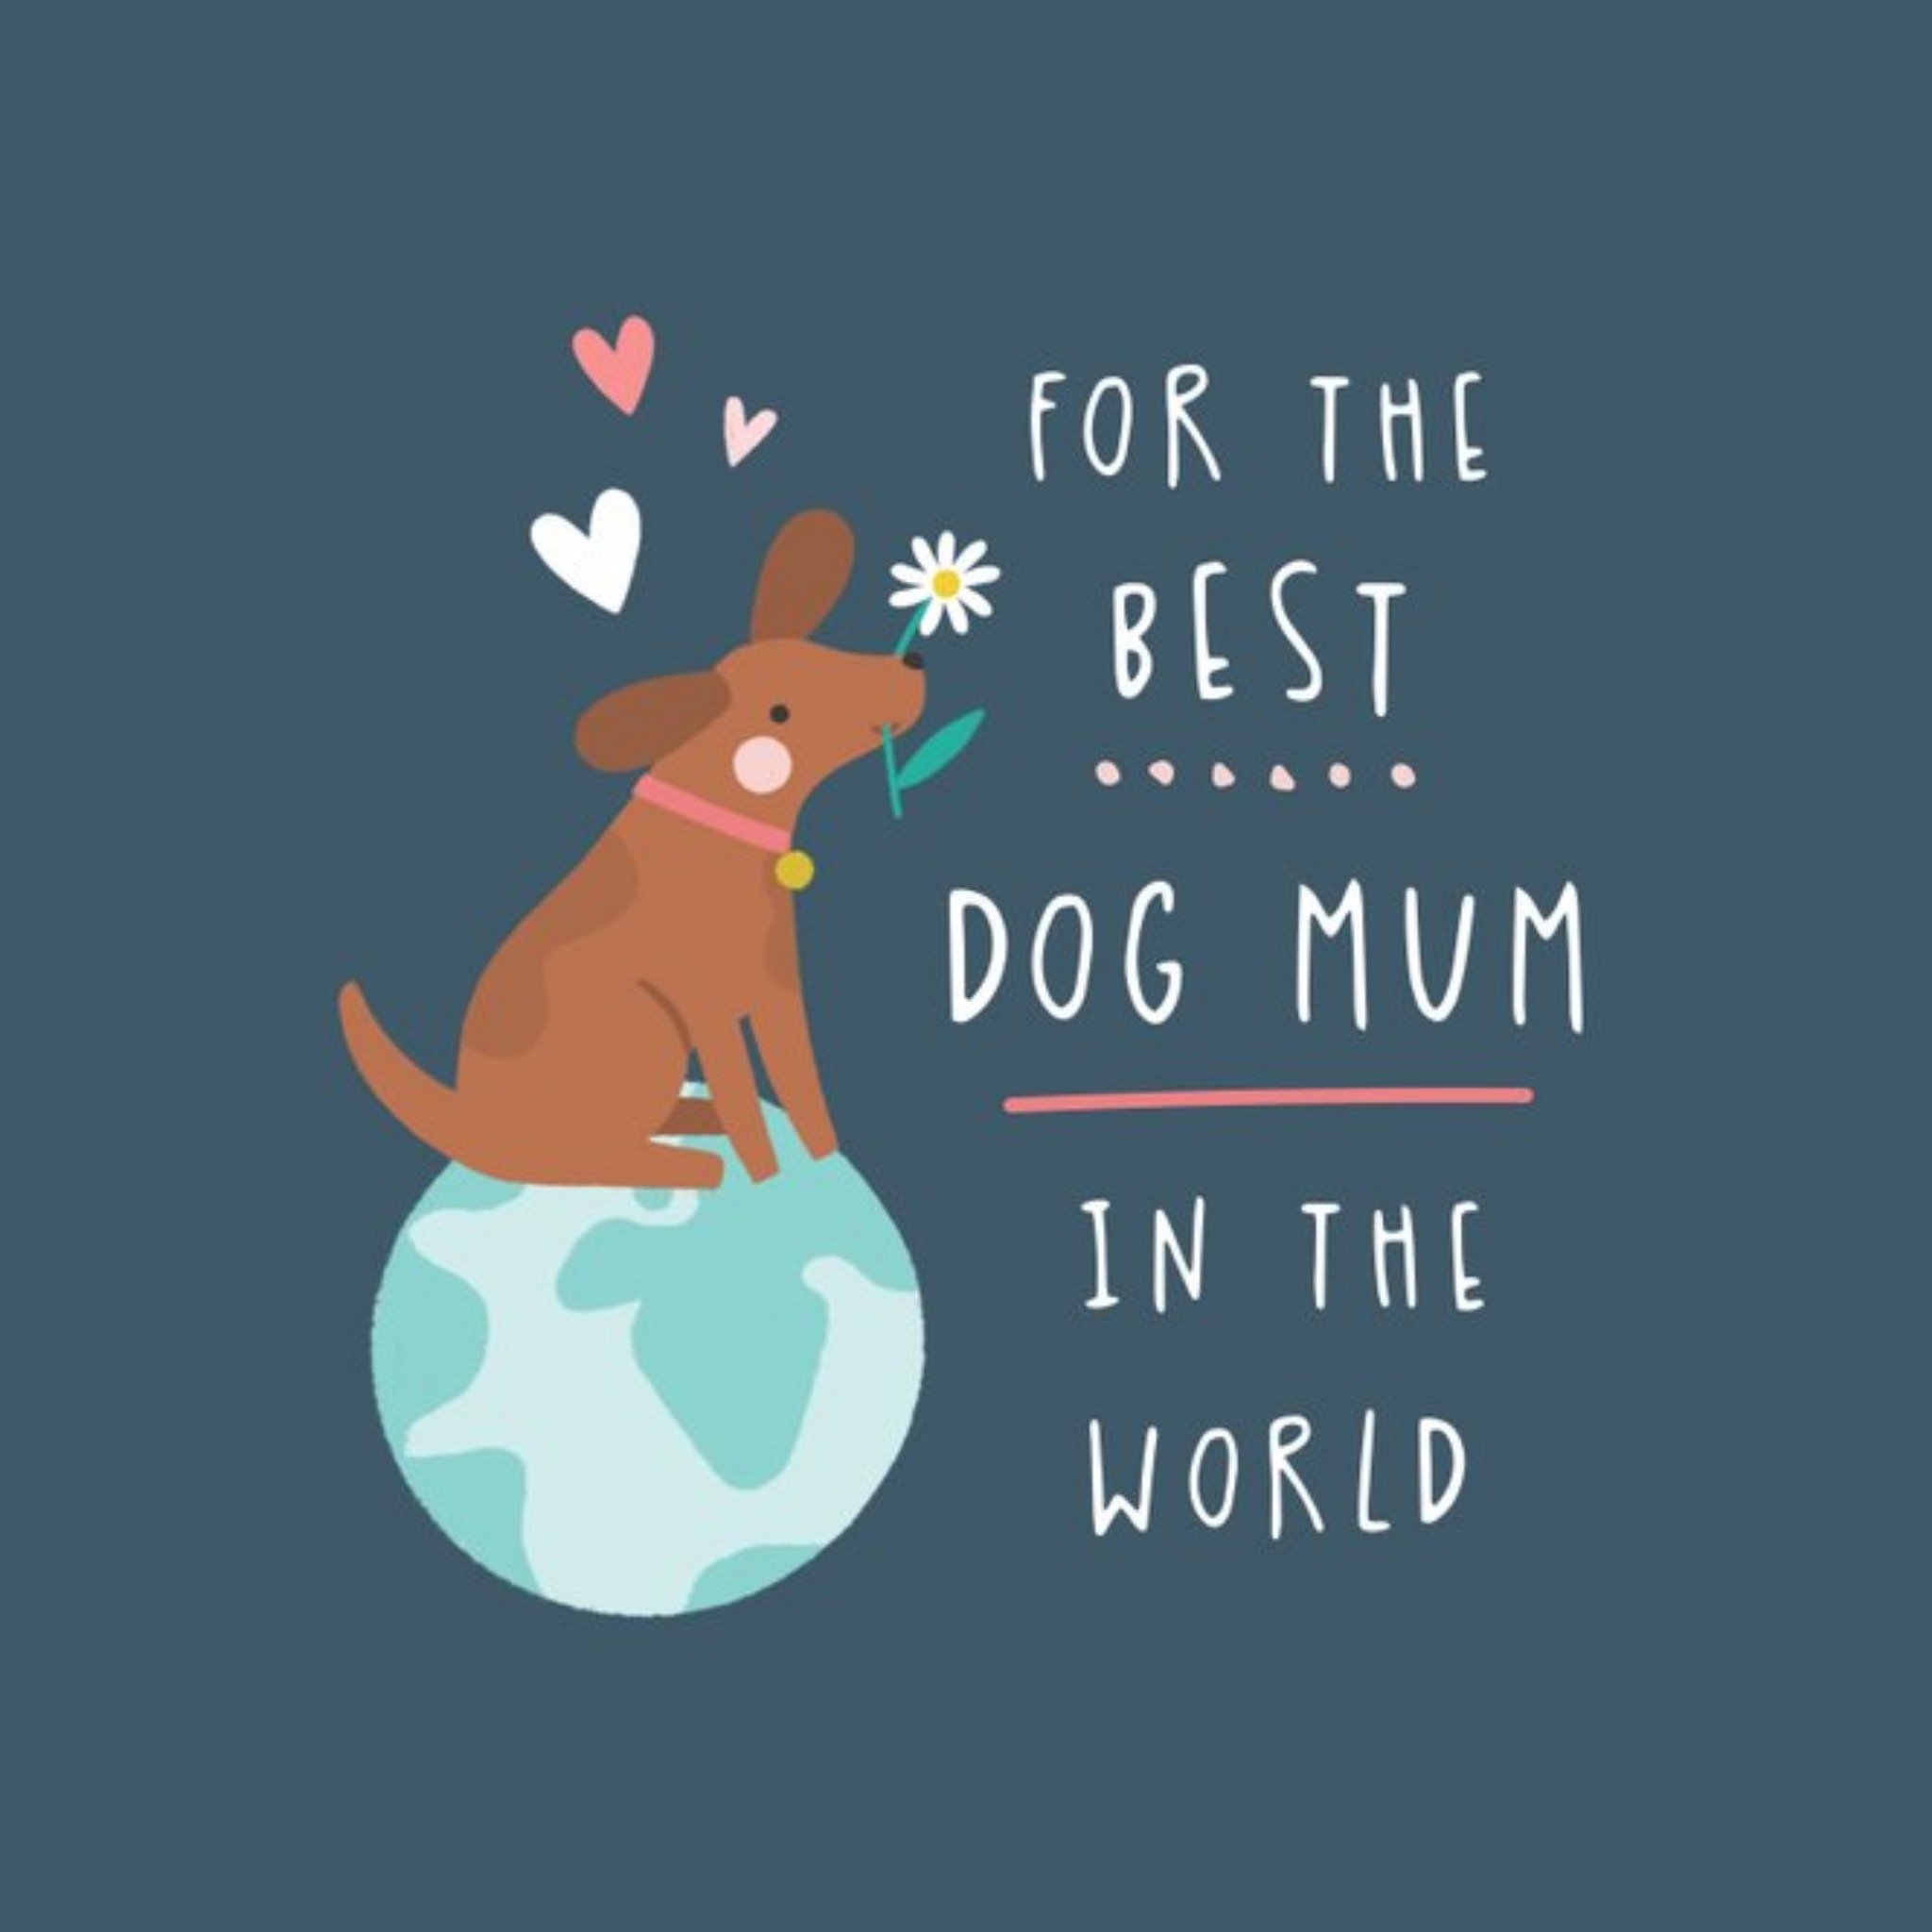 Moonpig Illustration Of A Dog Sitting On Top Of The World From The Dog Mother's Day Card, Large